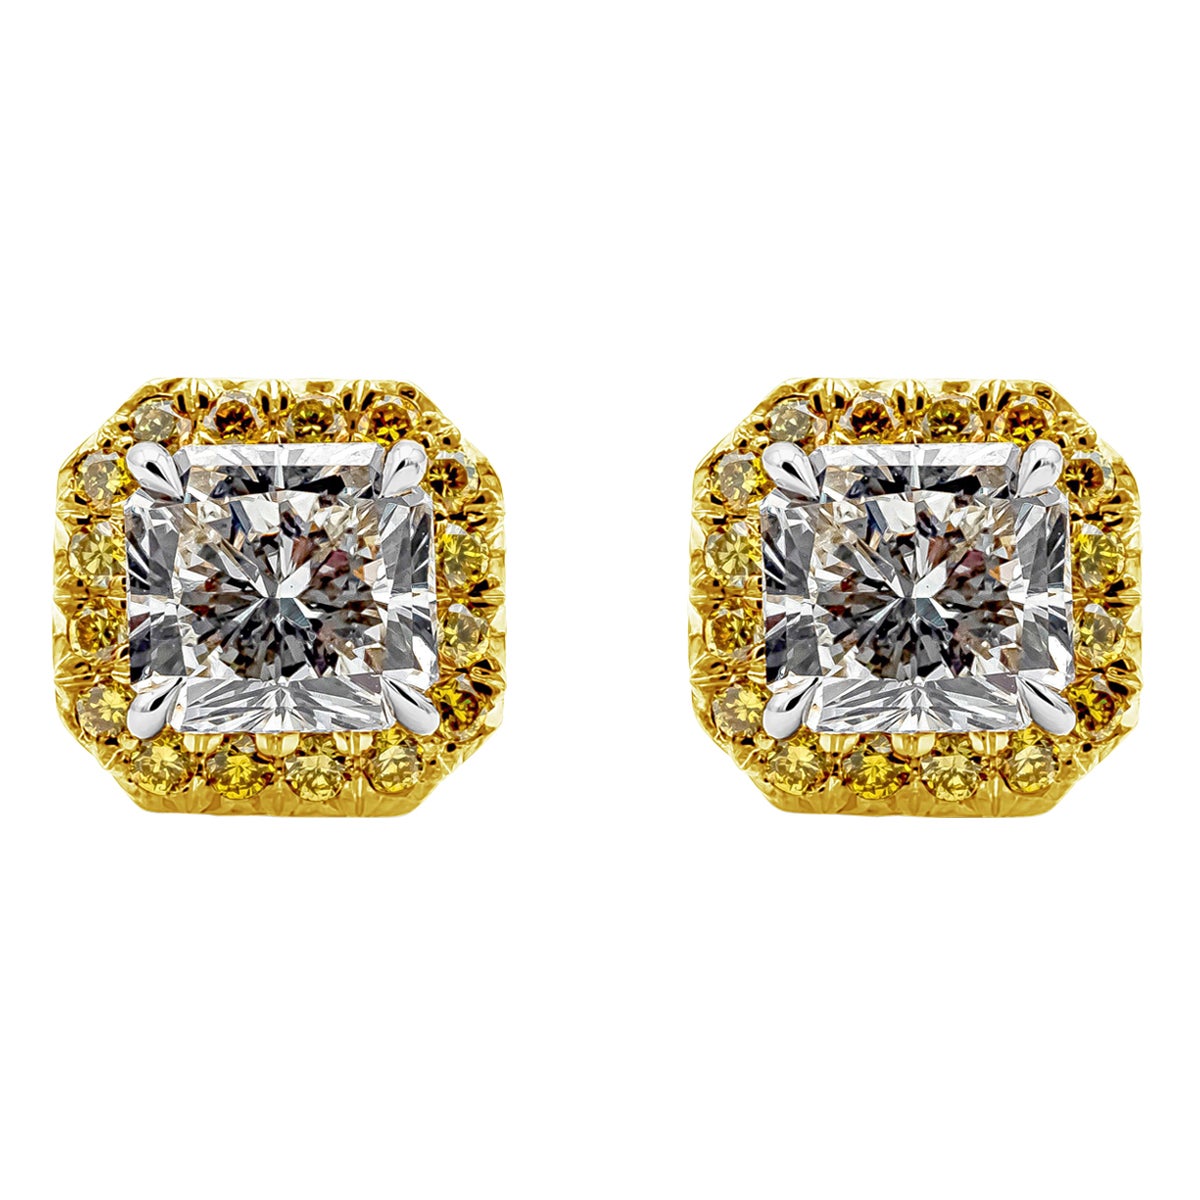 GIA Certified 1.73 Carat Total Radiant Cut Diamond Yellow Halo Stud Earrings For Sale